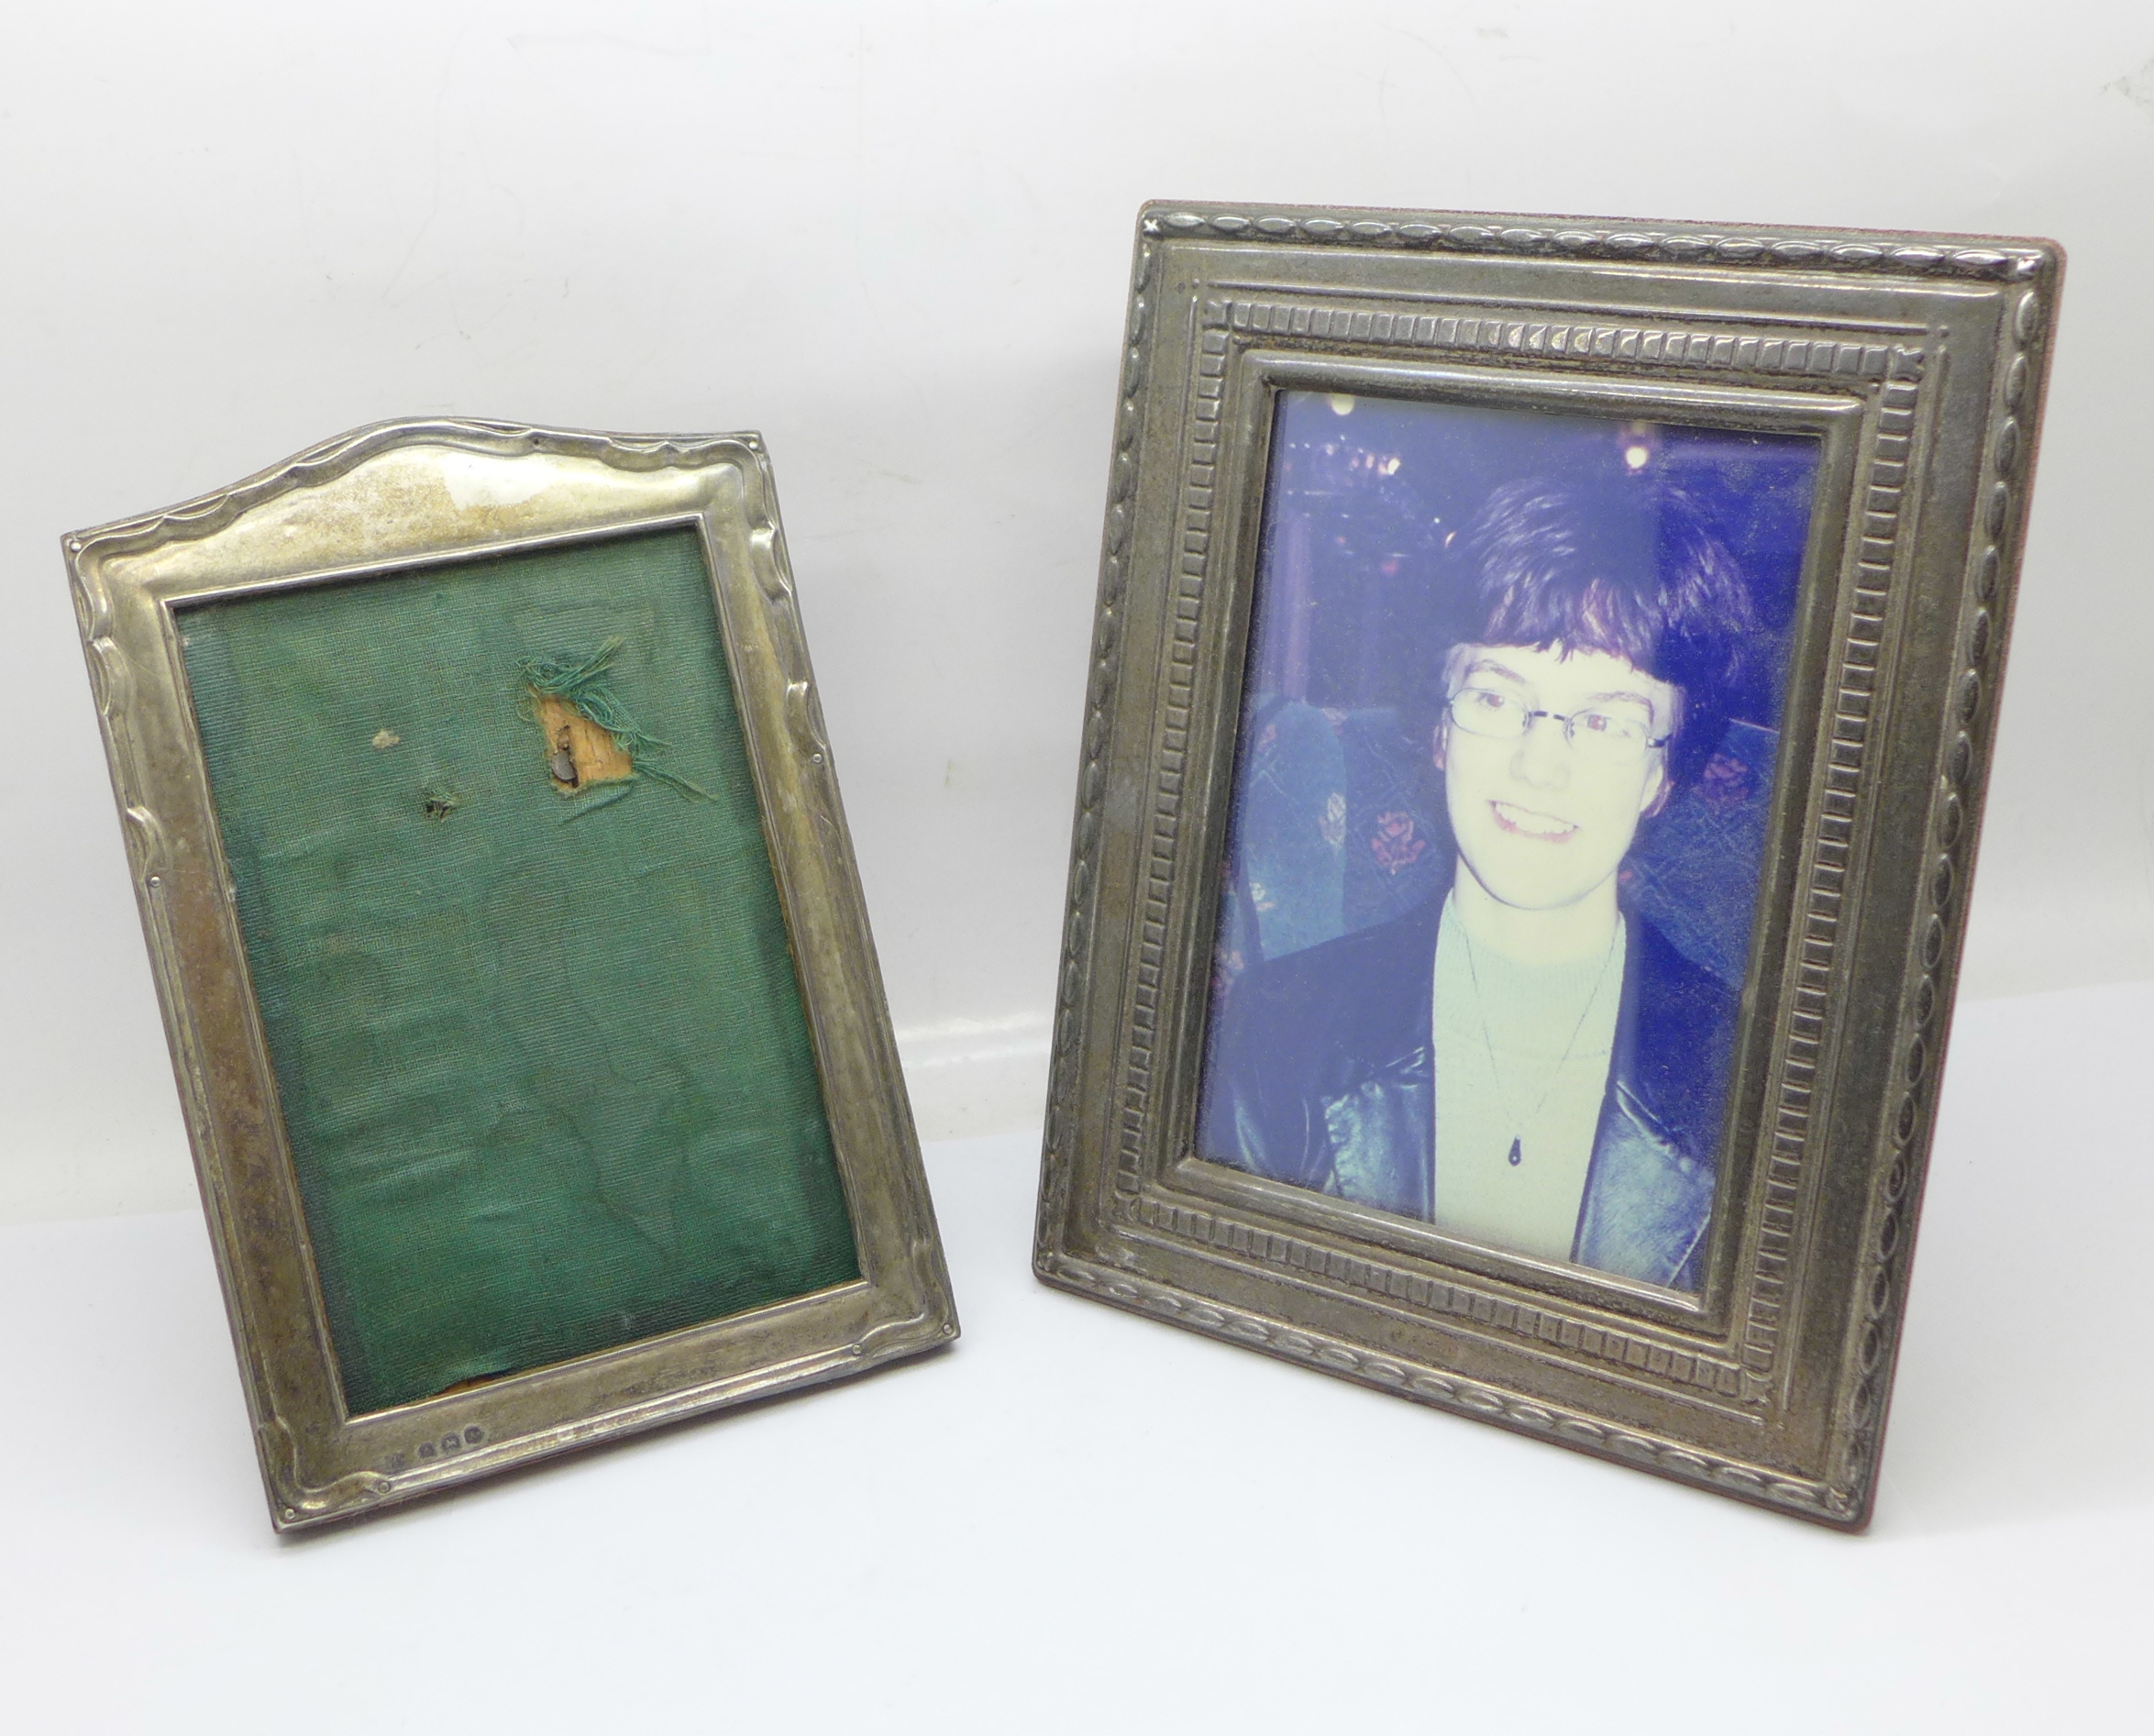 Two silver fronted photograph frames